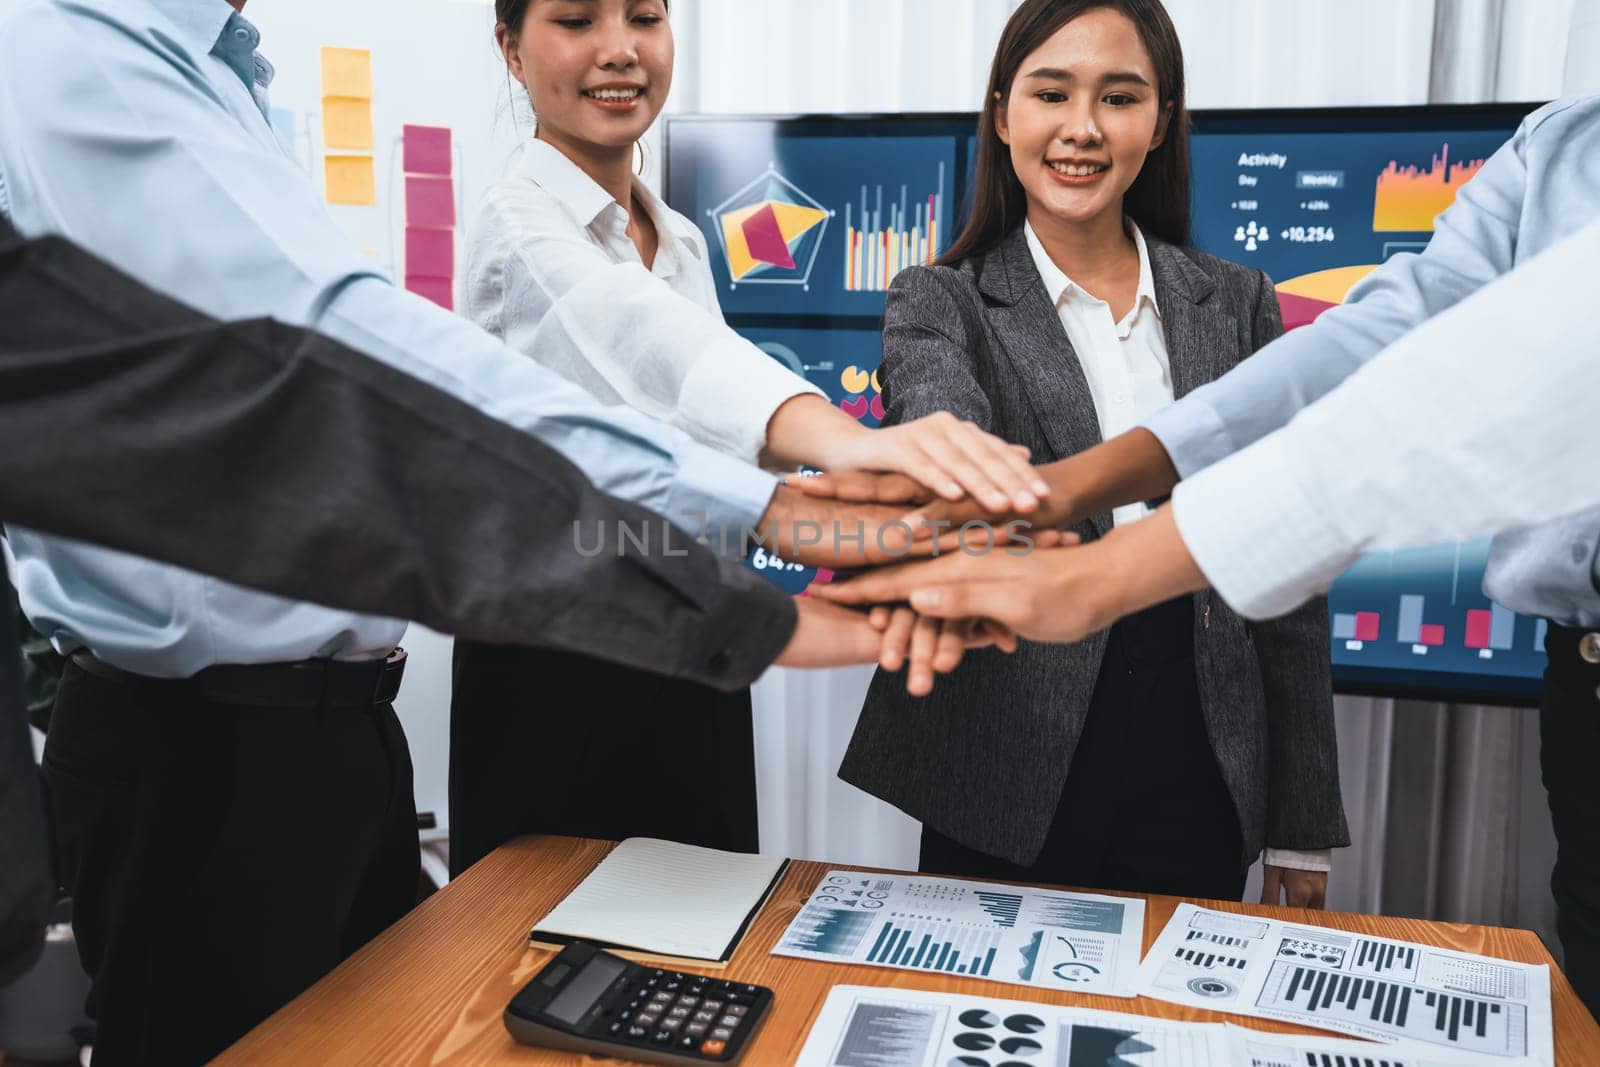 Multiracial office worker's hand stack shows solidarity, teamwork and trust in diverse community. Businesspeople unite for business success through synergy and collaboration by hand stacking. Concord